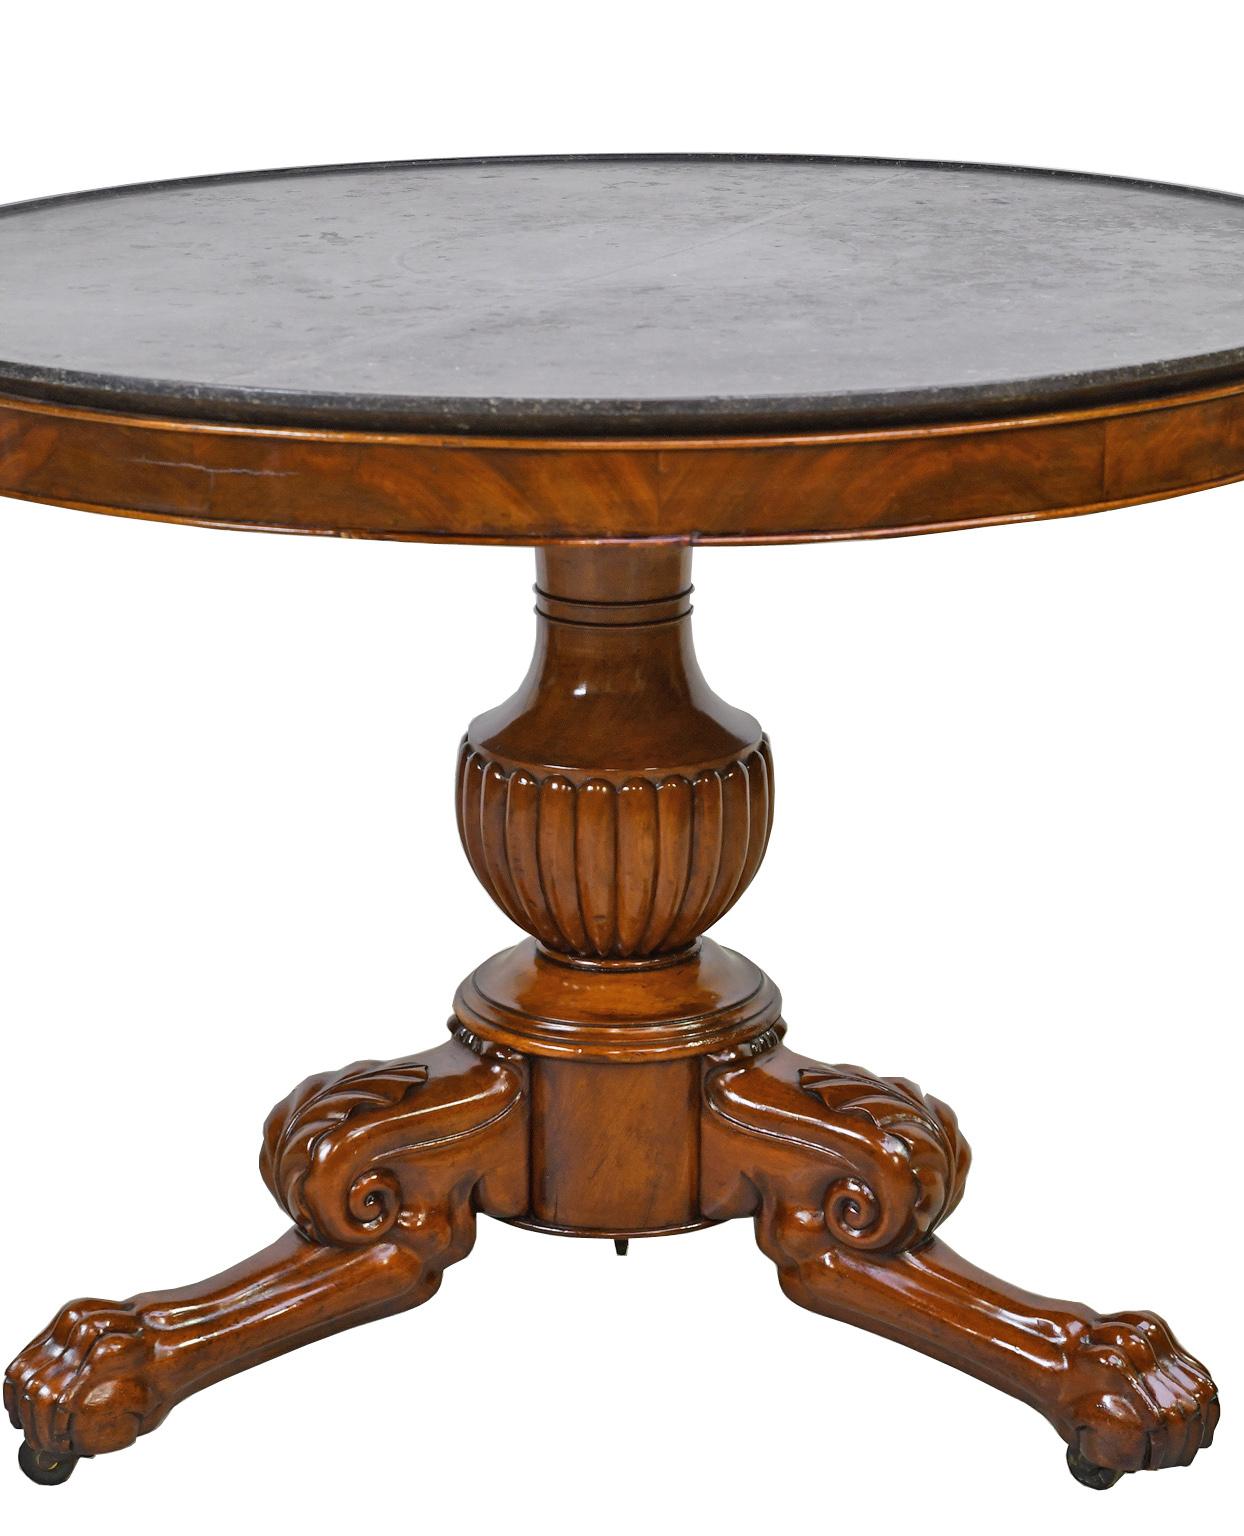 Polished French Charles X Guéridon Pedestal Table in Mahogany with Round Marble Top